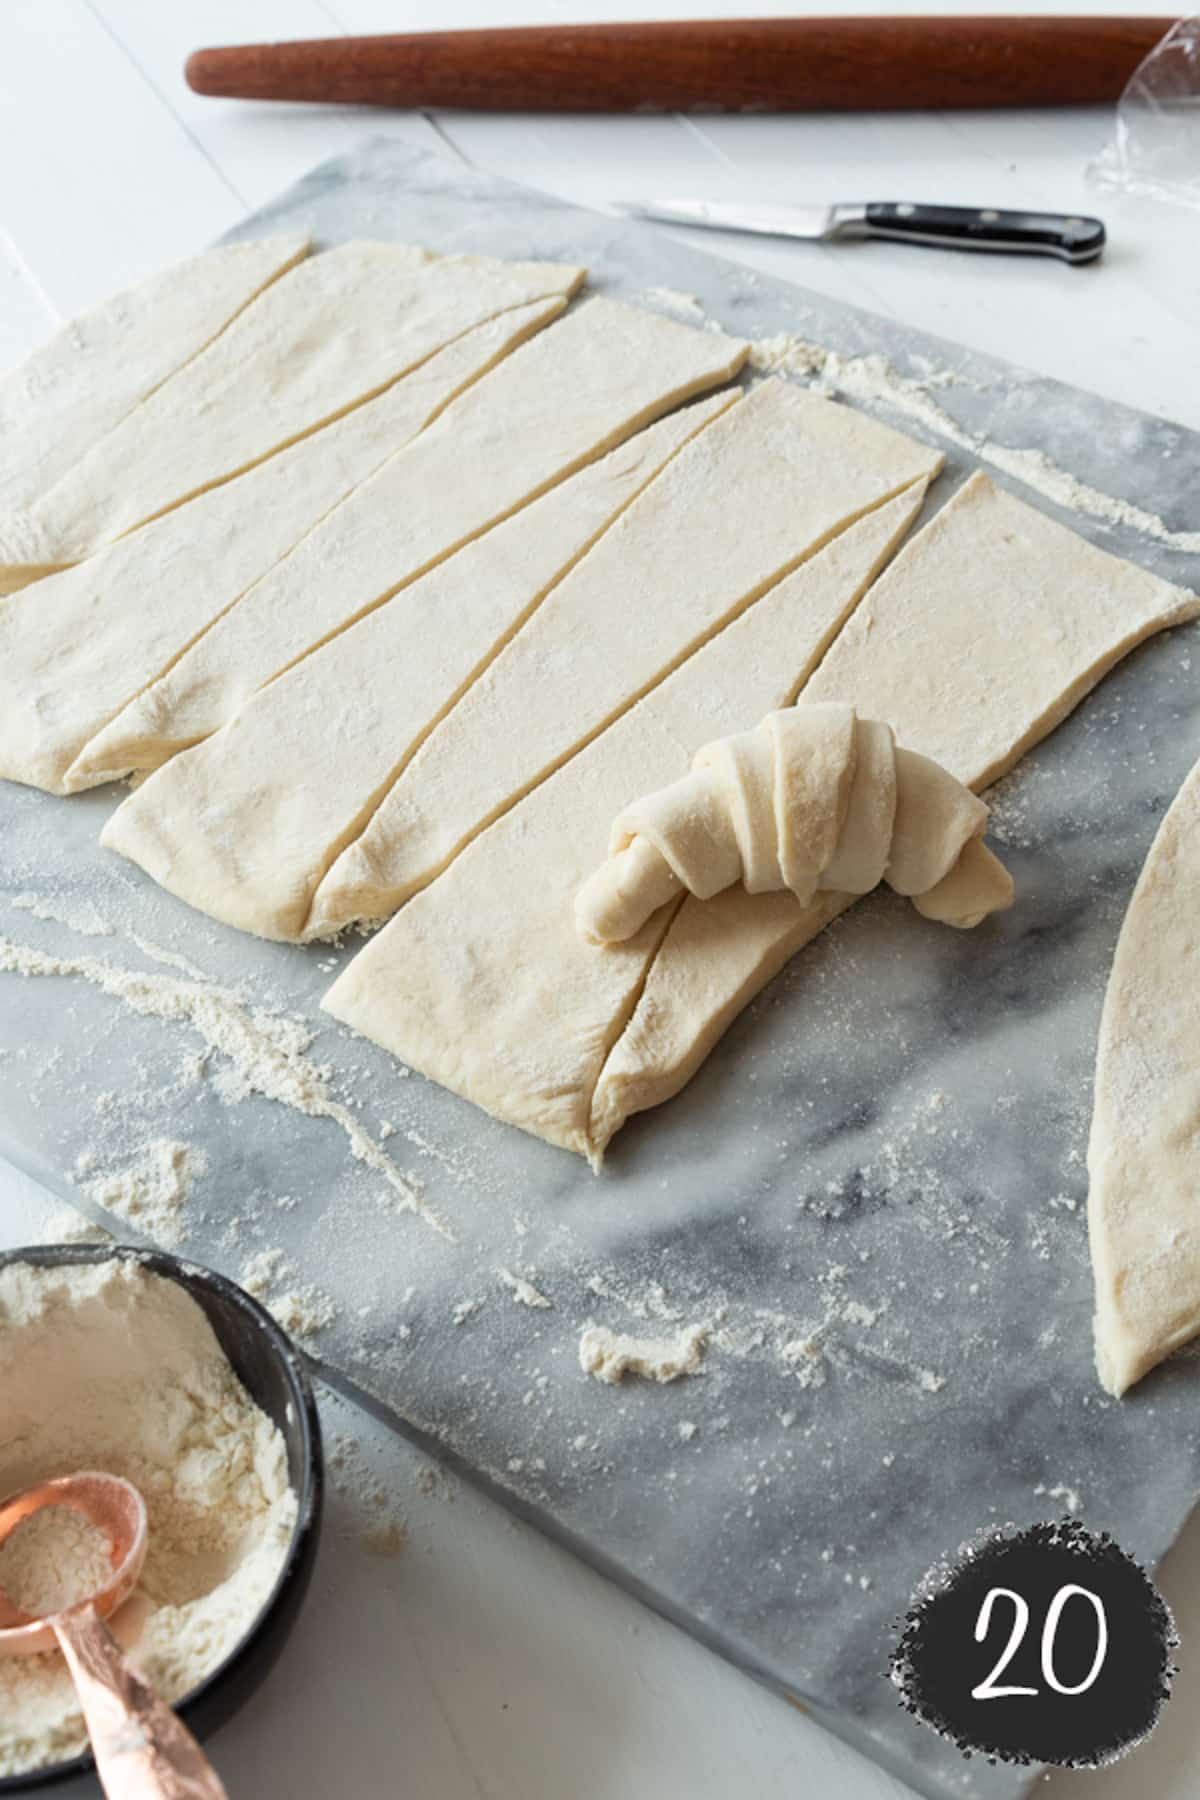 An unbaked croissant and triangles of dough.